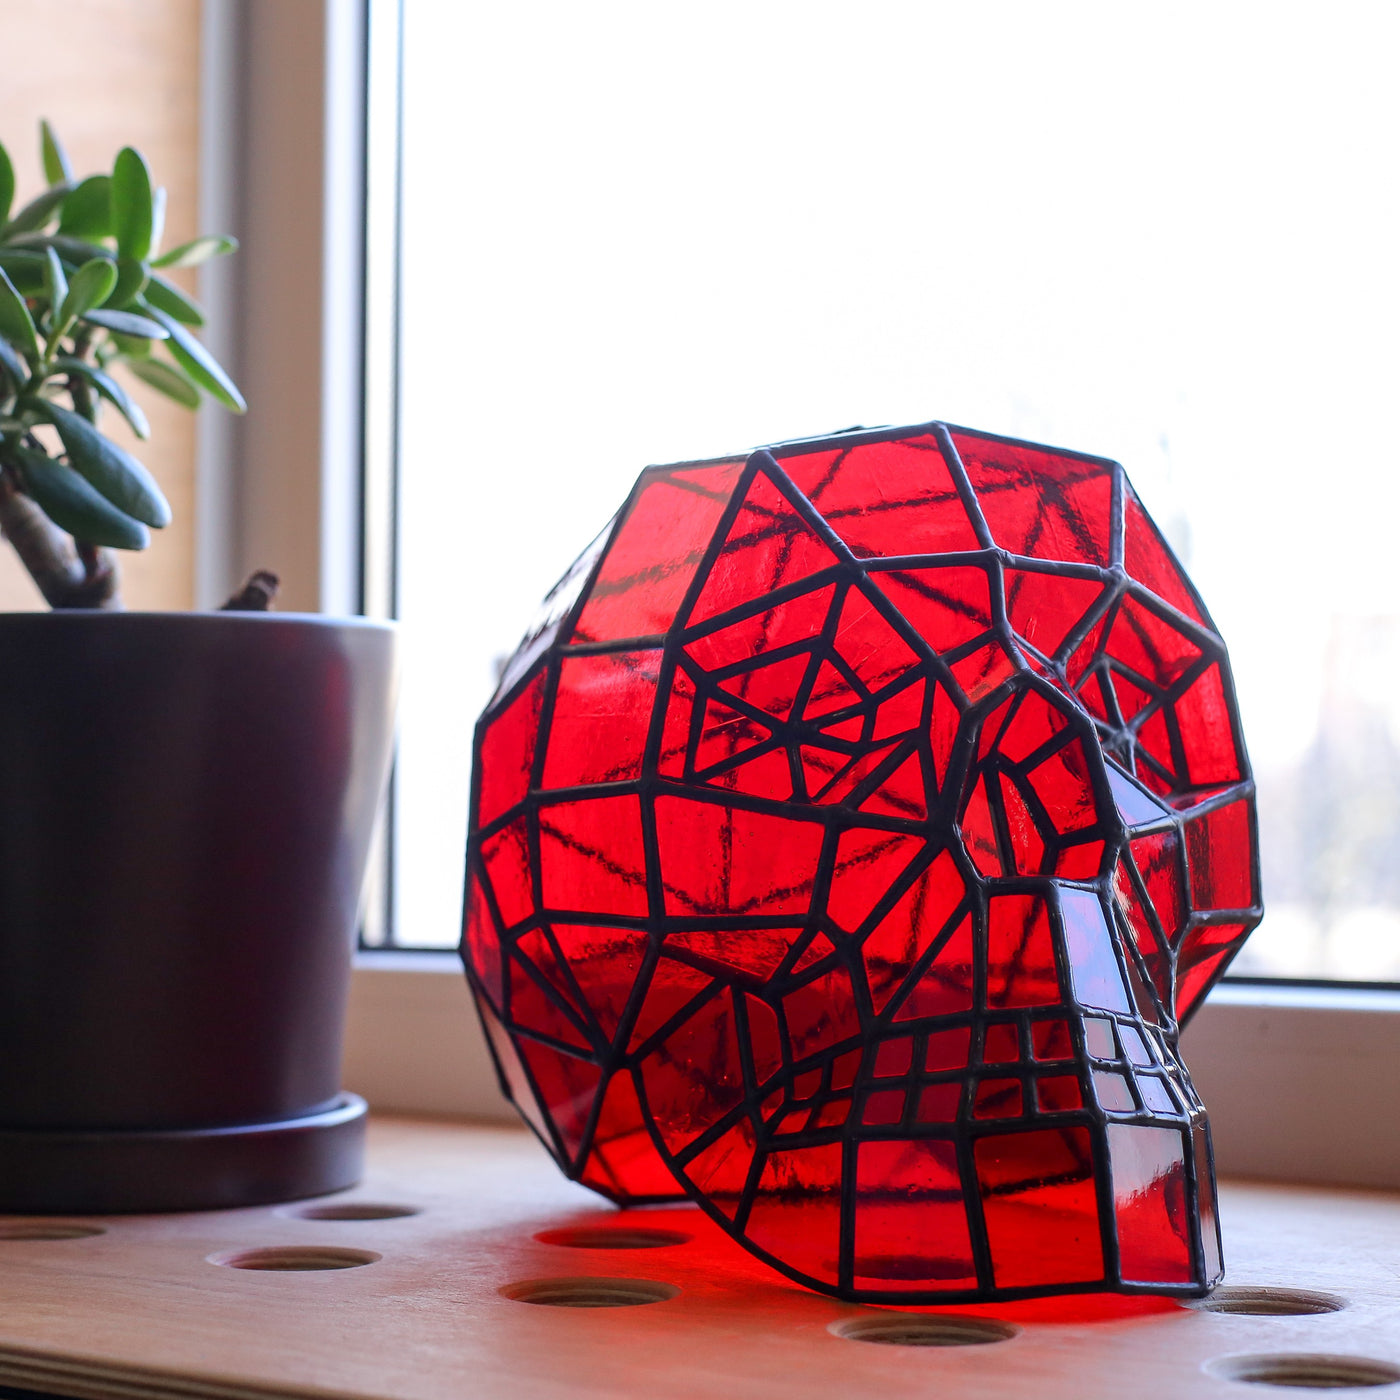 Red-coloured stained glass 3D human skull for Halloween celebrations